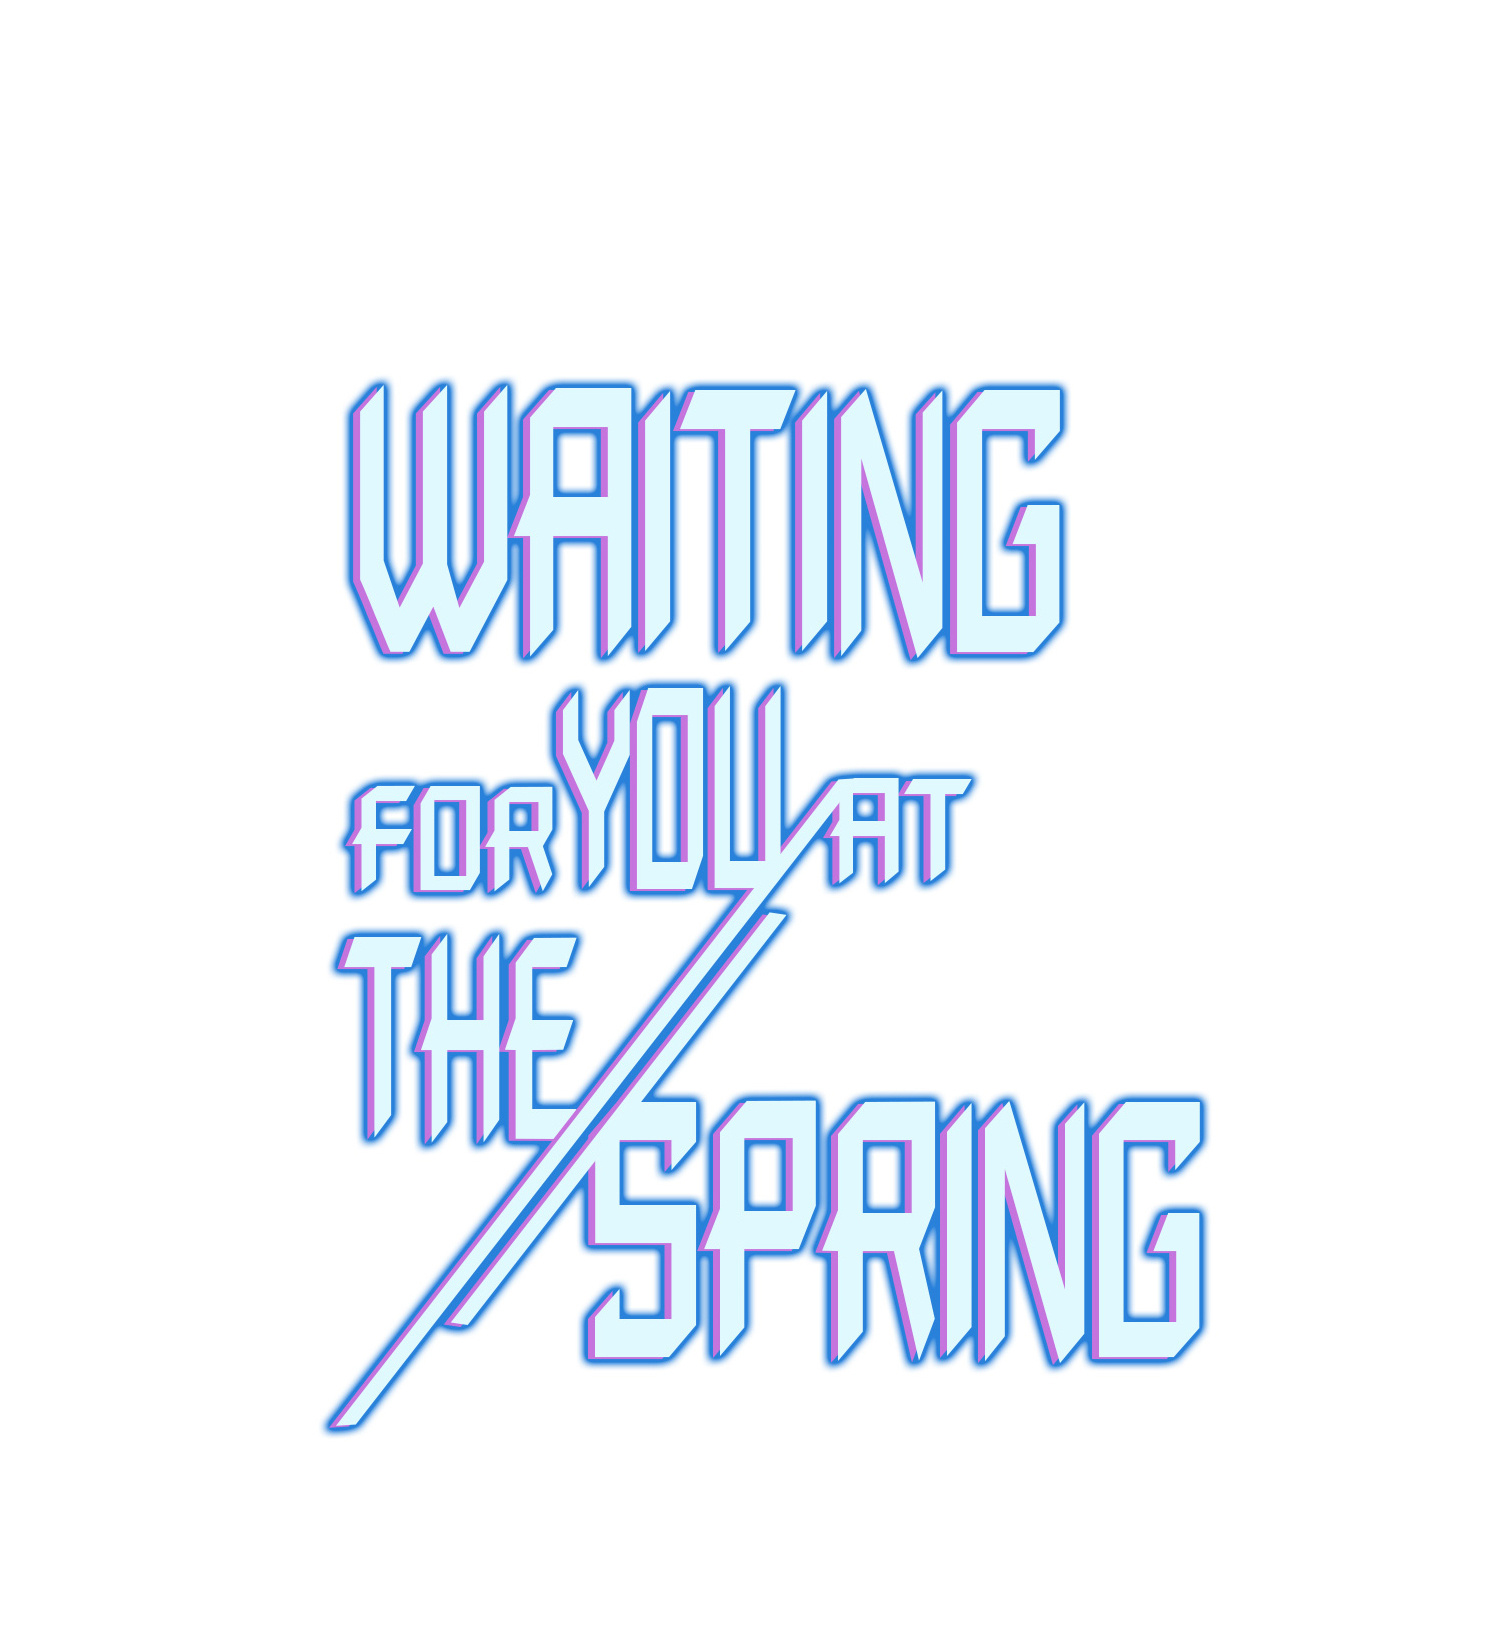 Waiting For You At The Spring - Page 1